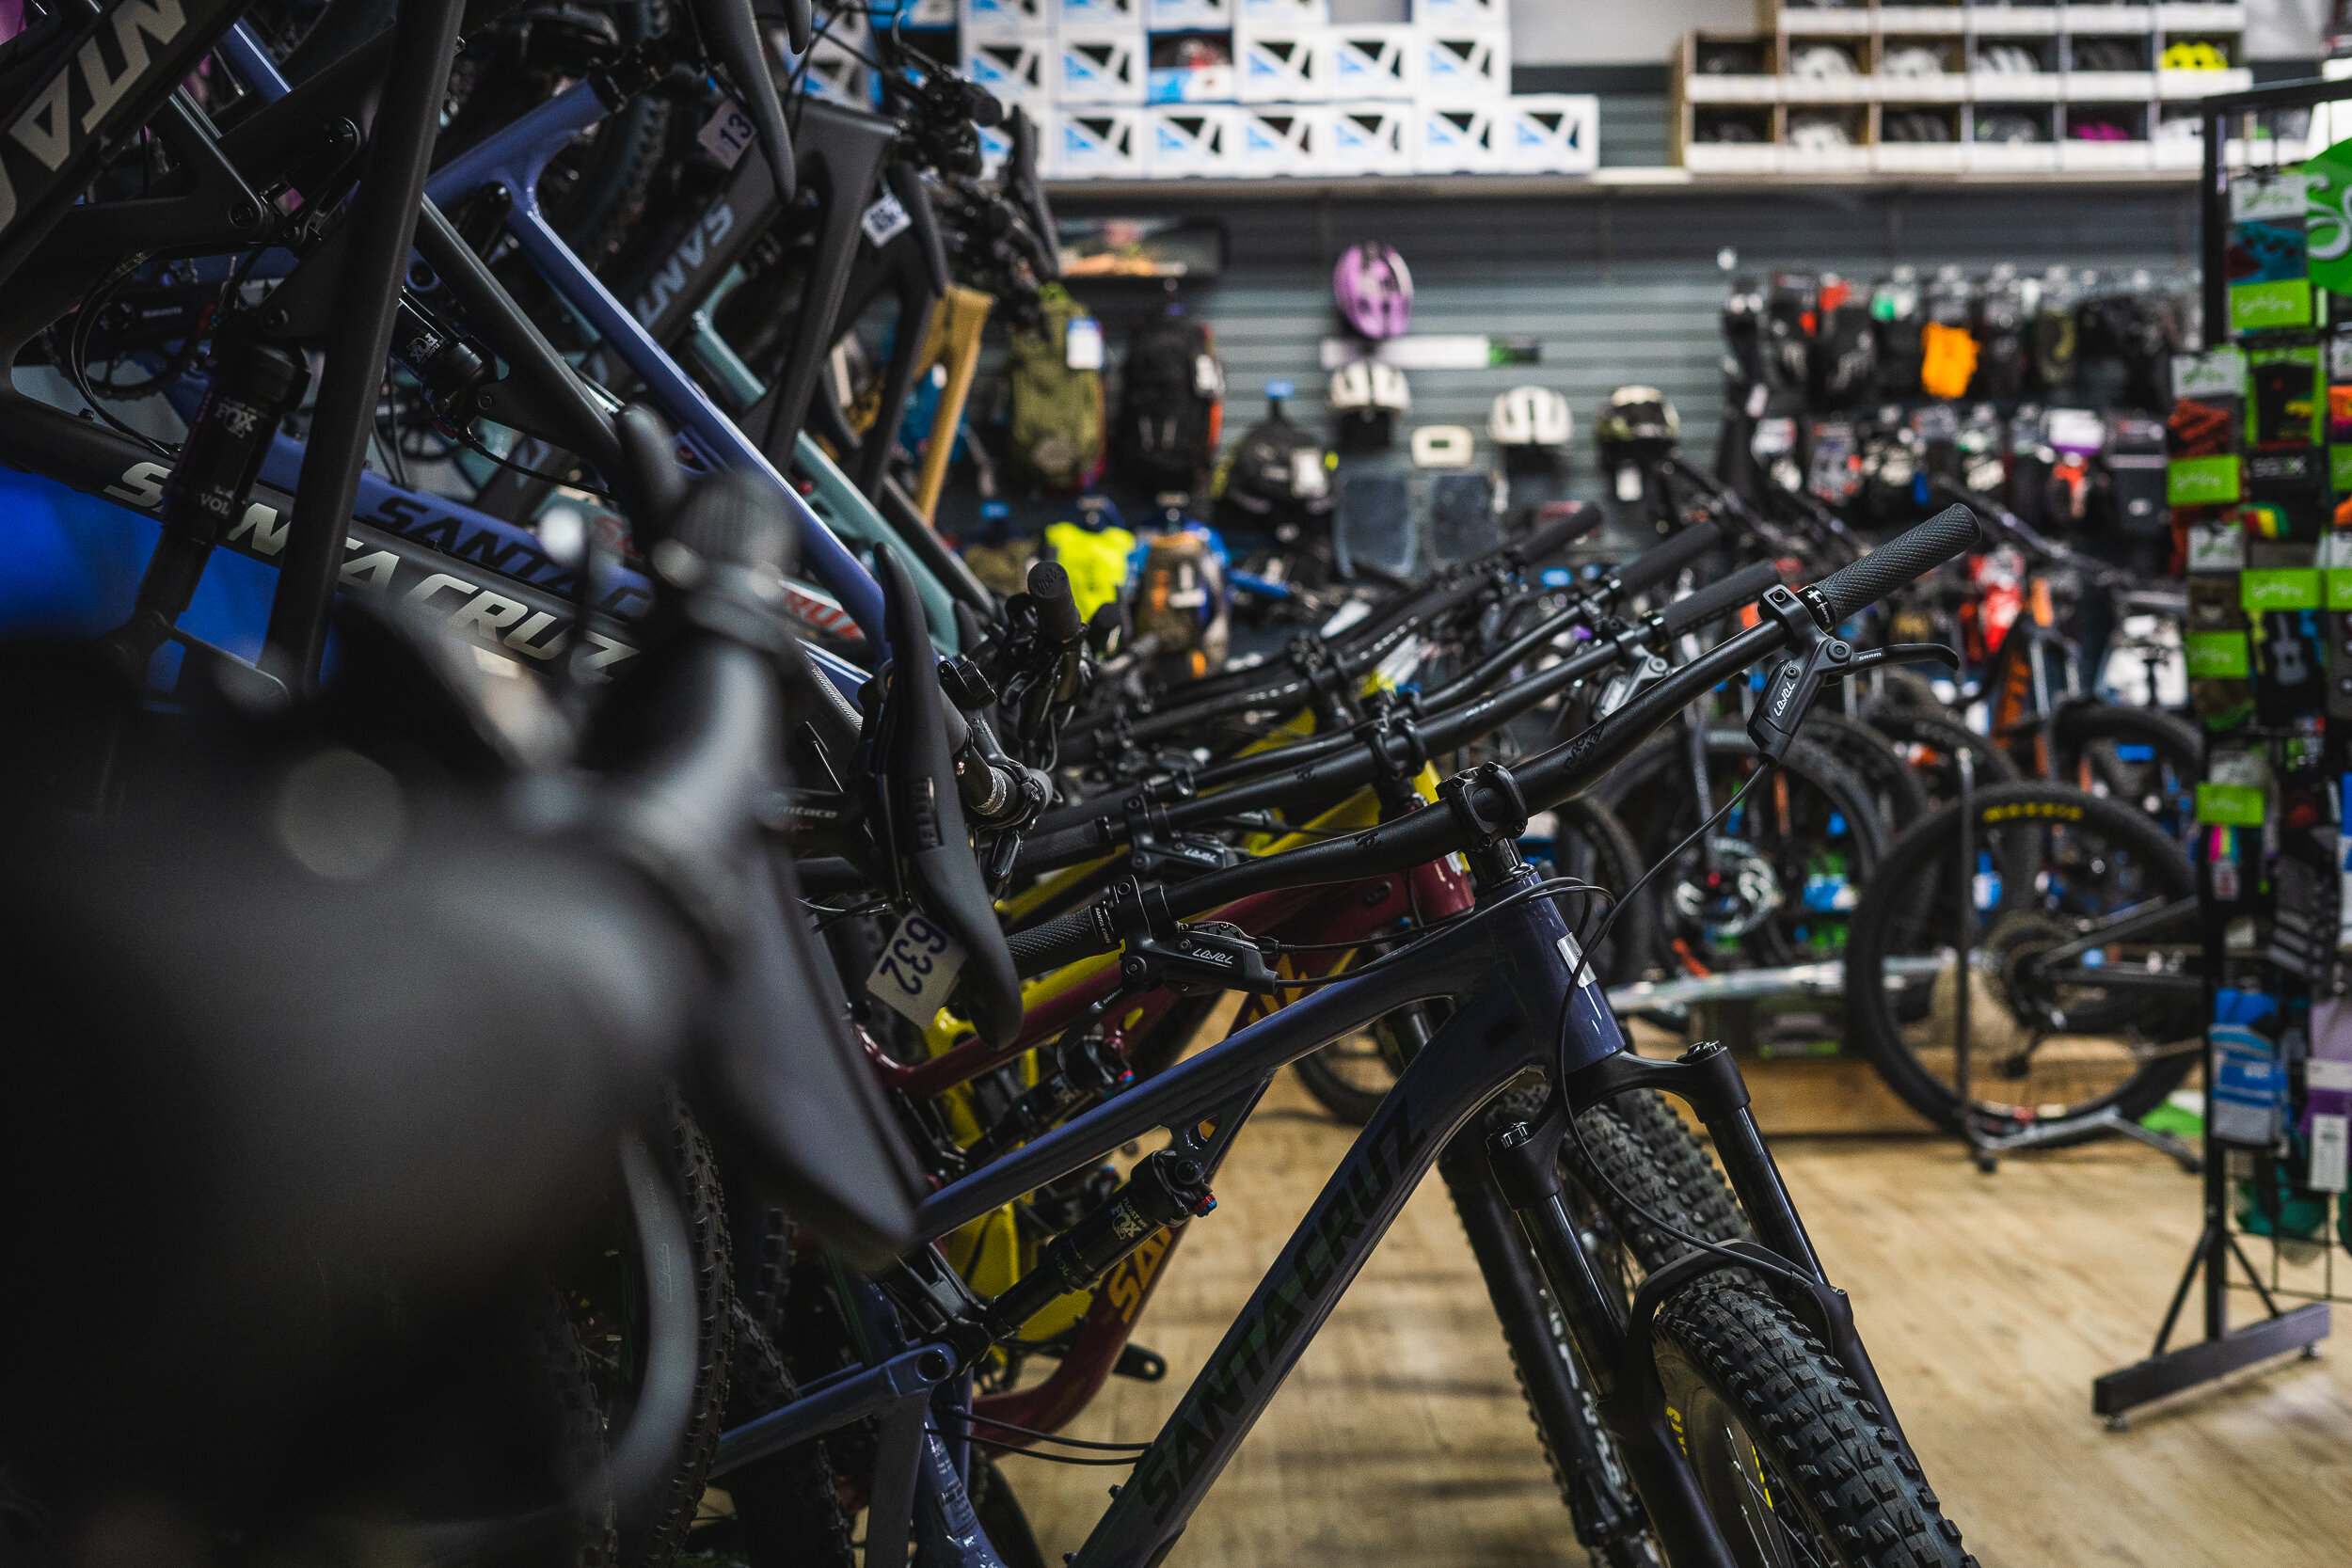 largest online bicycle store